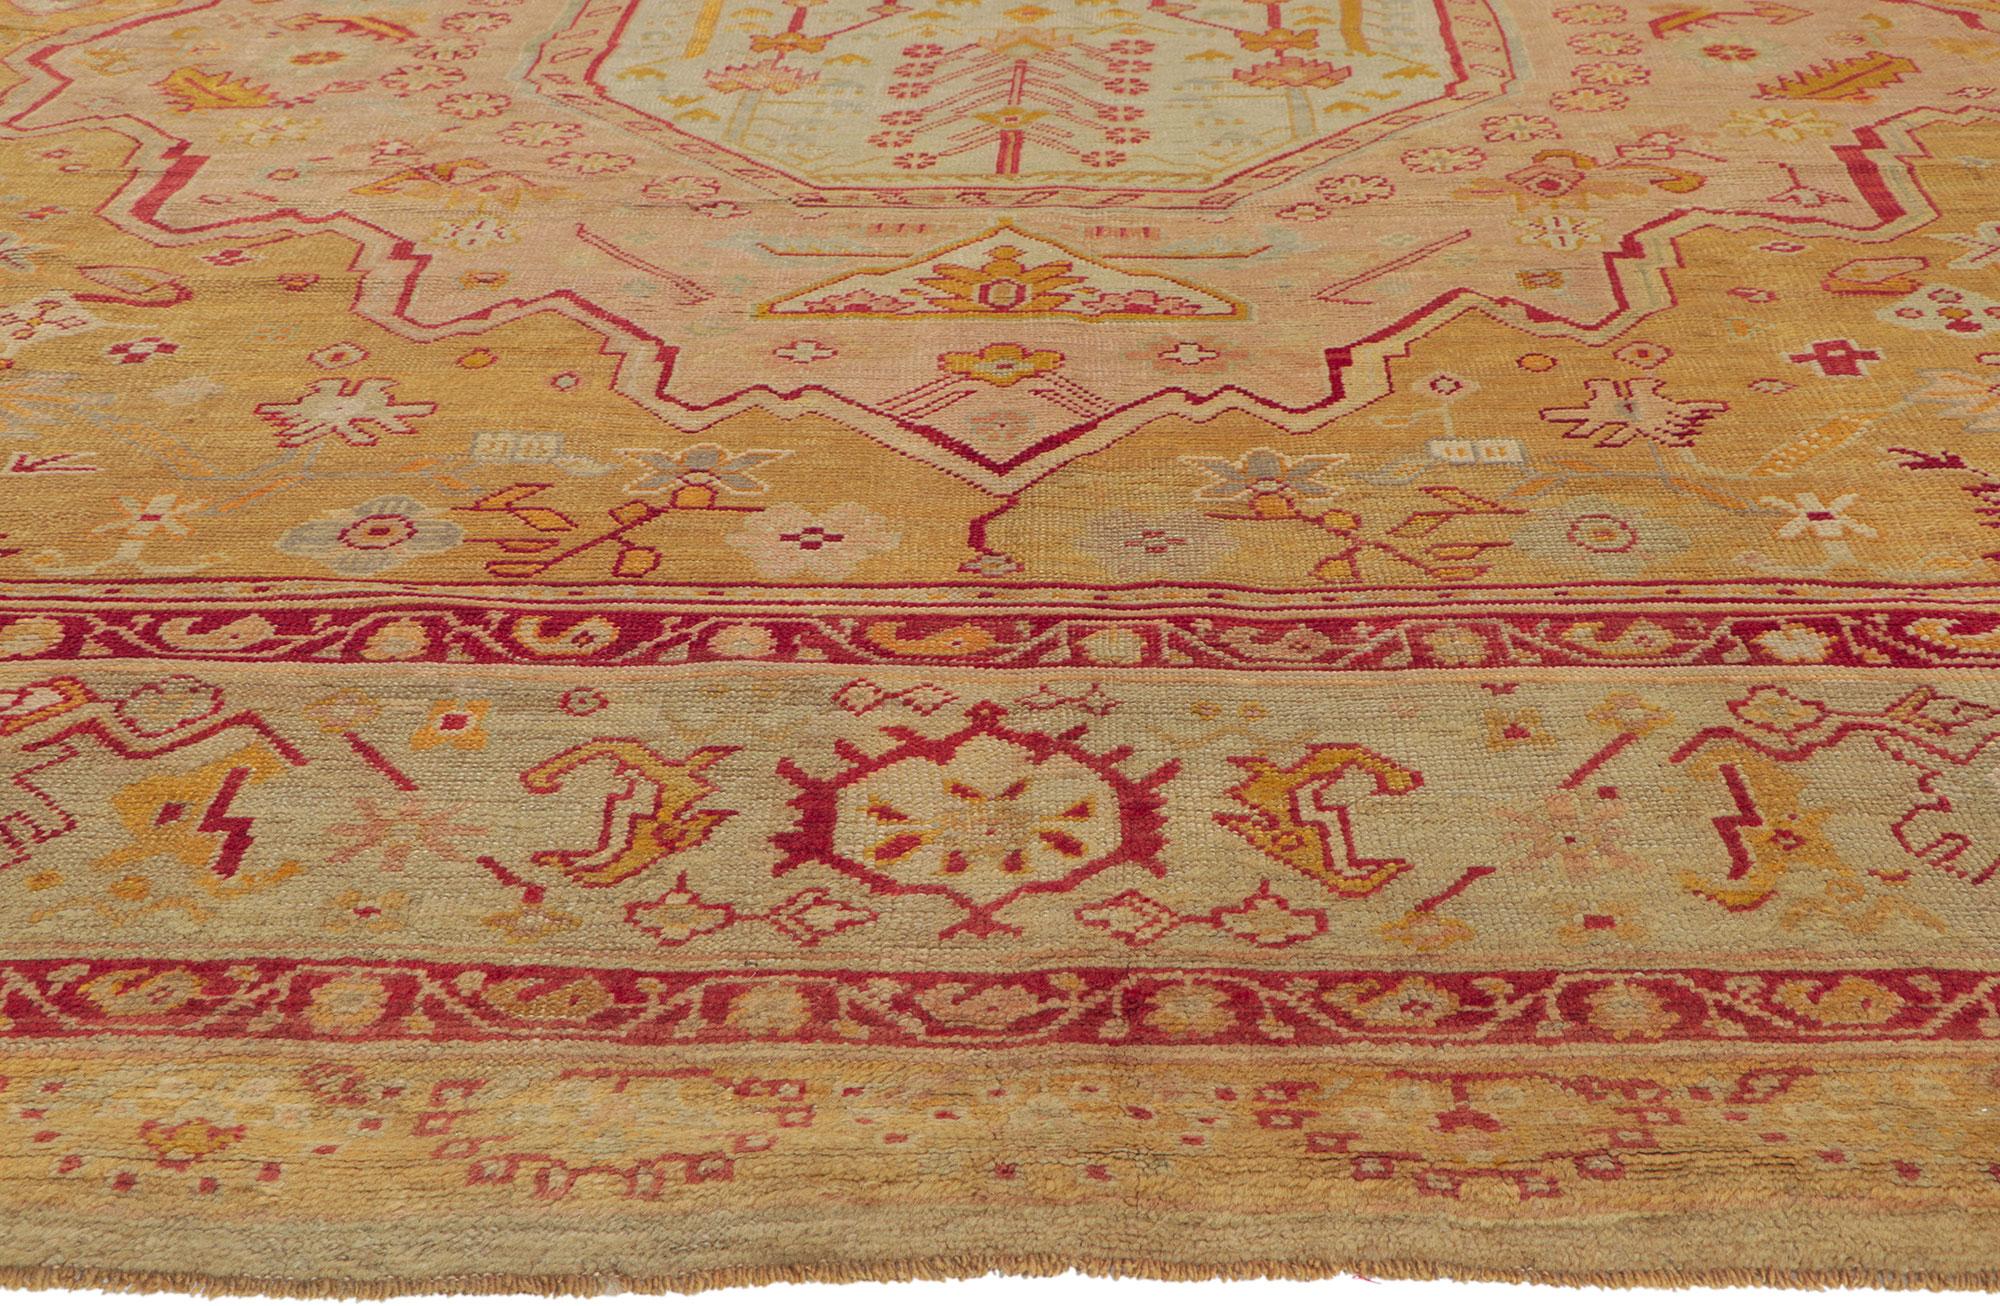 Antique Turkish Oushak Rug, French Provincial Meets Cosmopolitan Chic In Good Condition For Sale In Dallas, TX